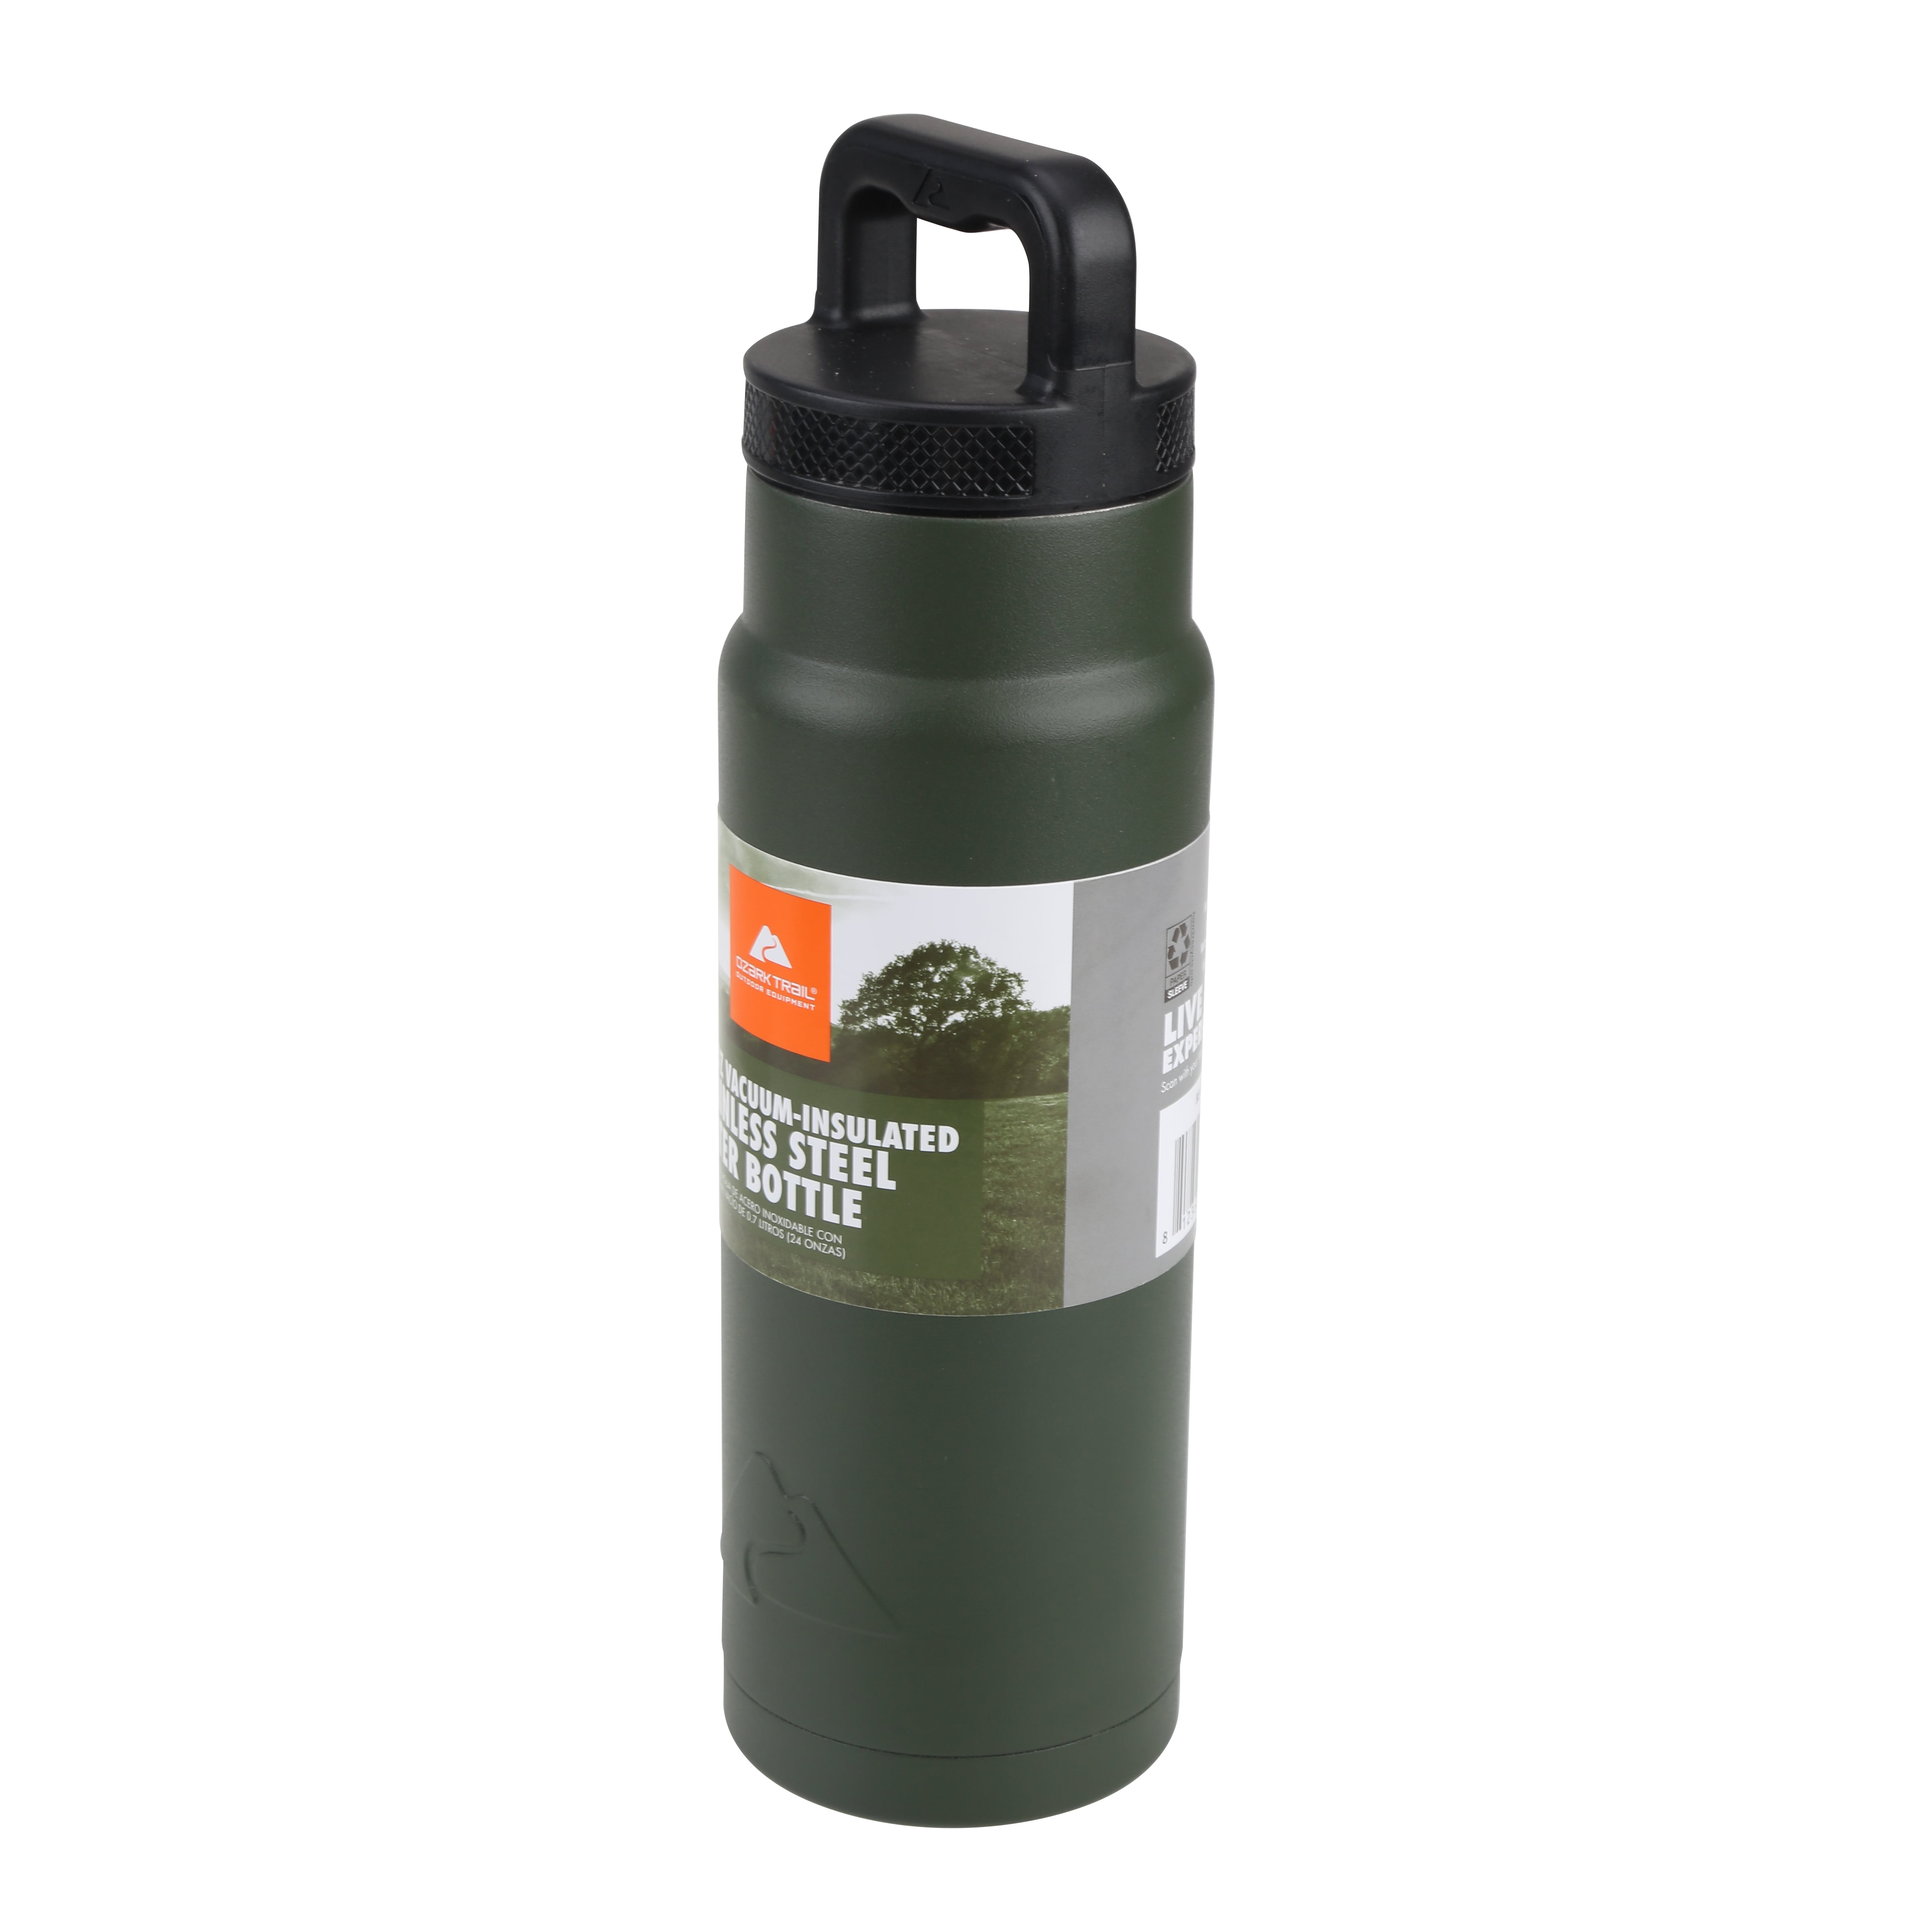 Redwood National & State Parks Map 24oz Water Bottle - Green